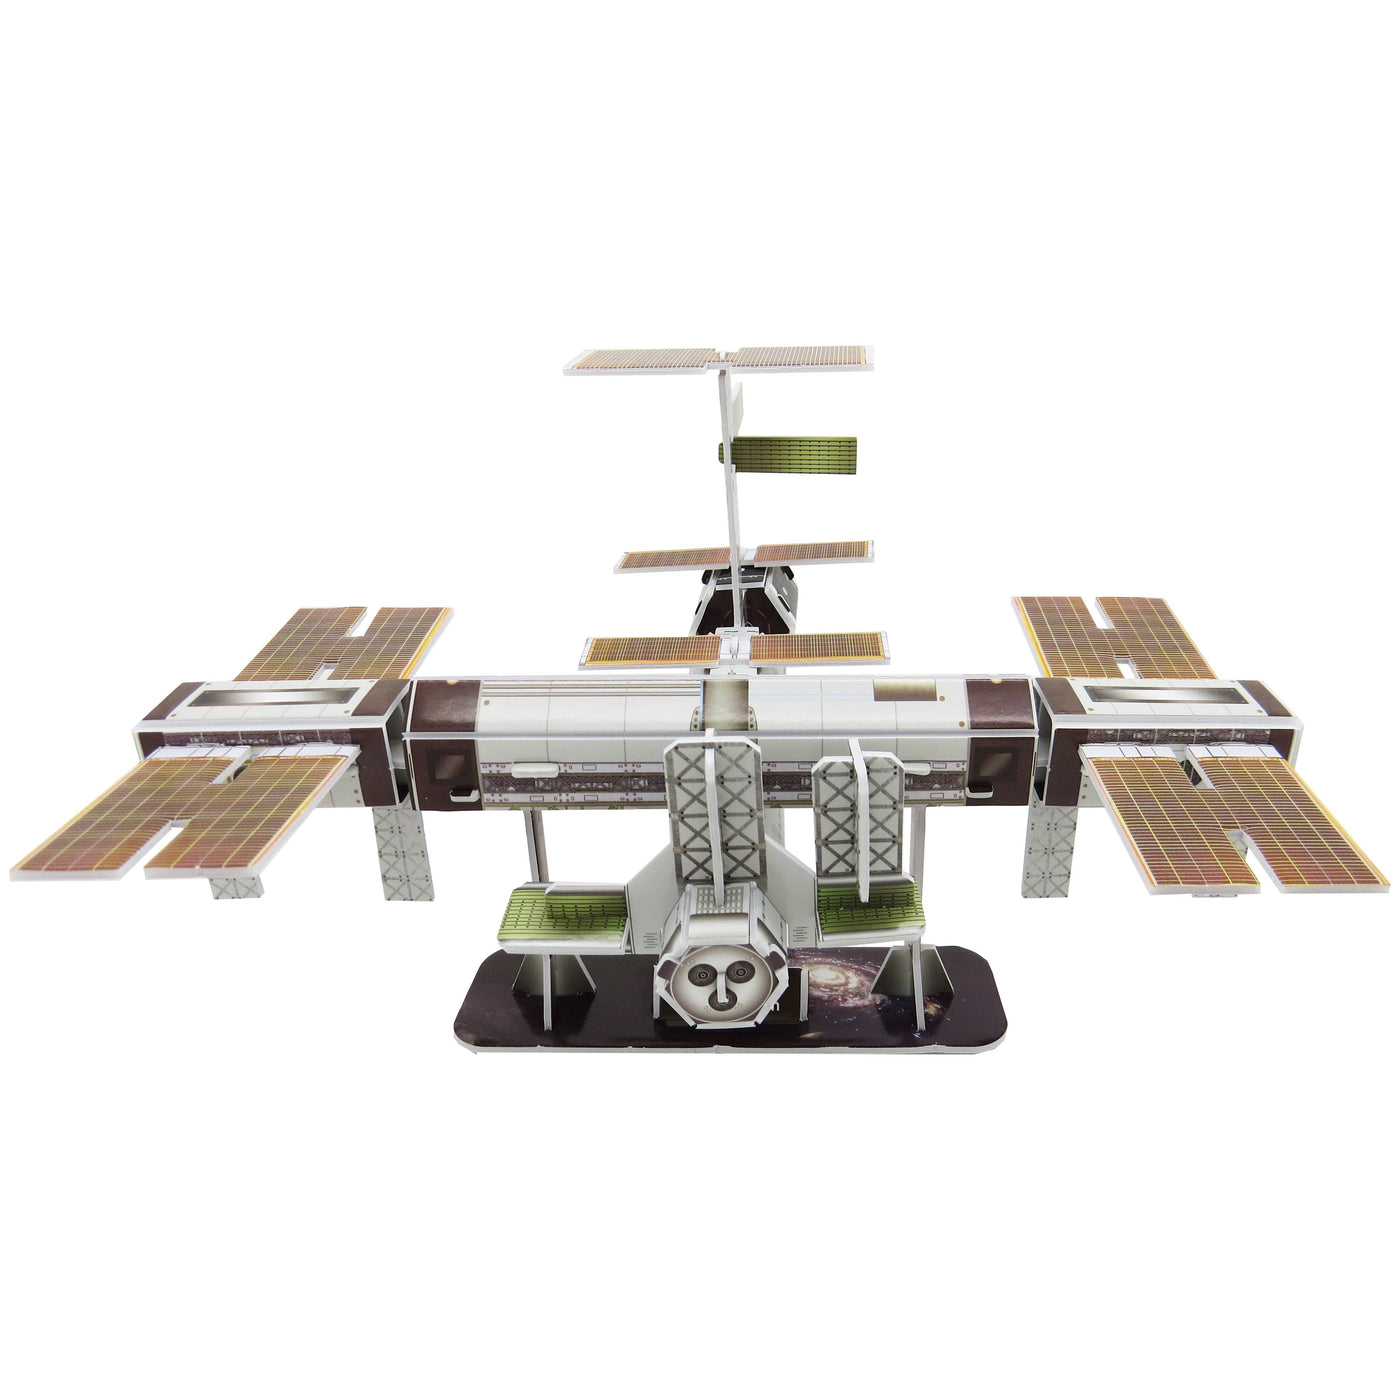 International Space Station - 3D Puzzle